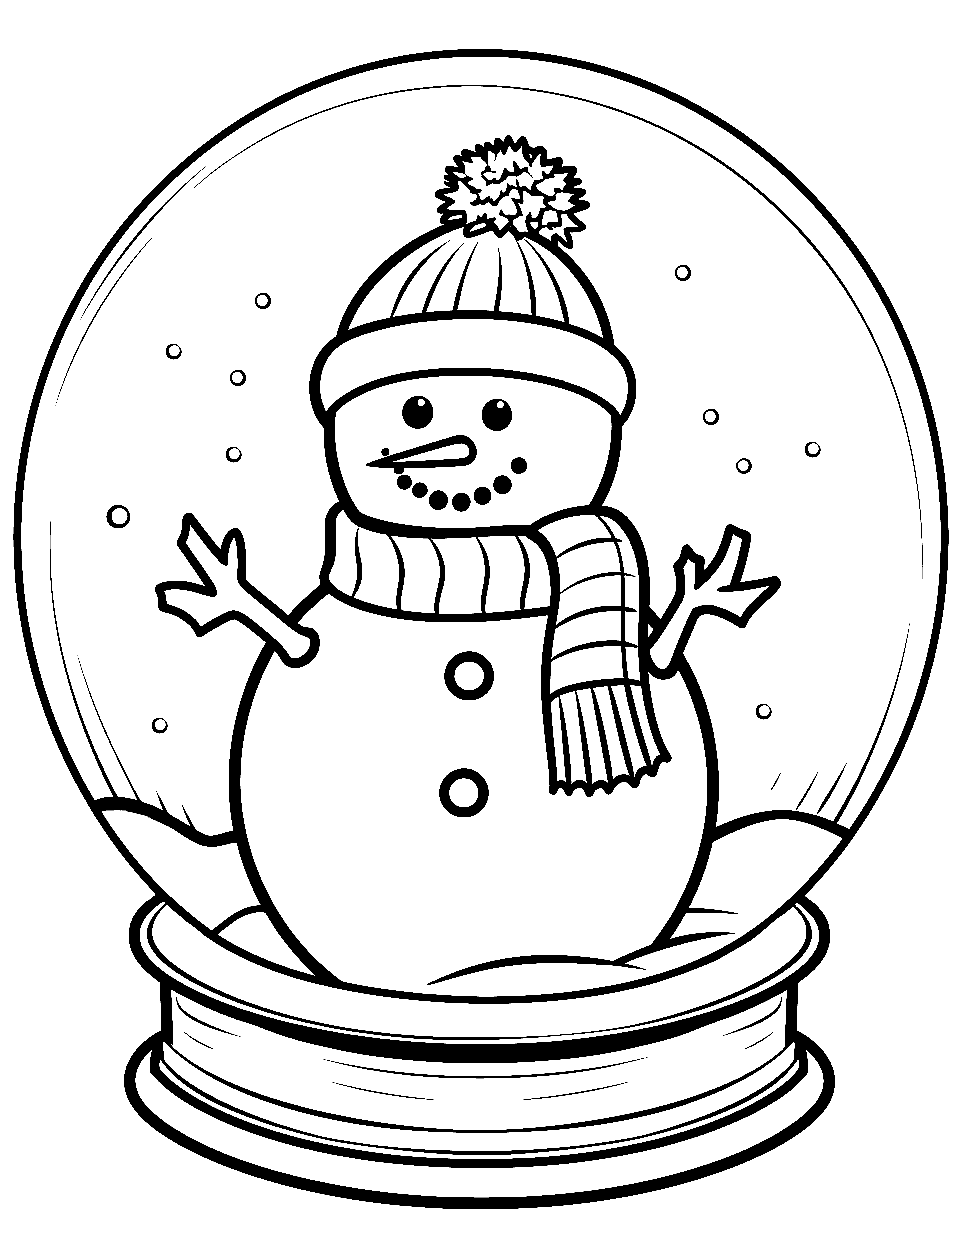 Snowman in a Snow Globe Coloring Page - A tiny snowman inside a snow globe, surrounded by falling snow.